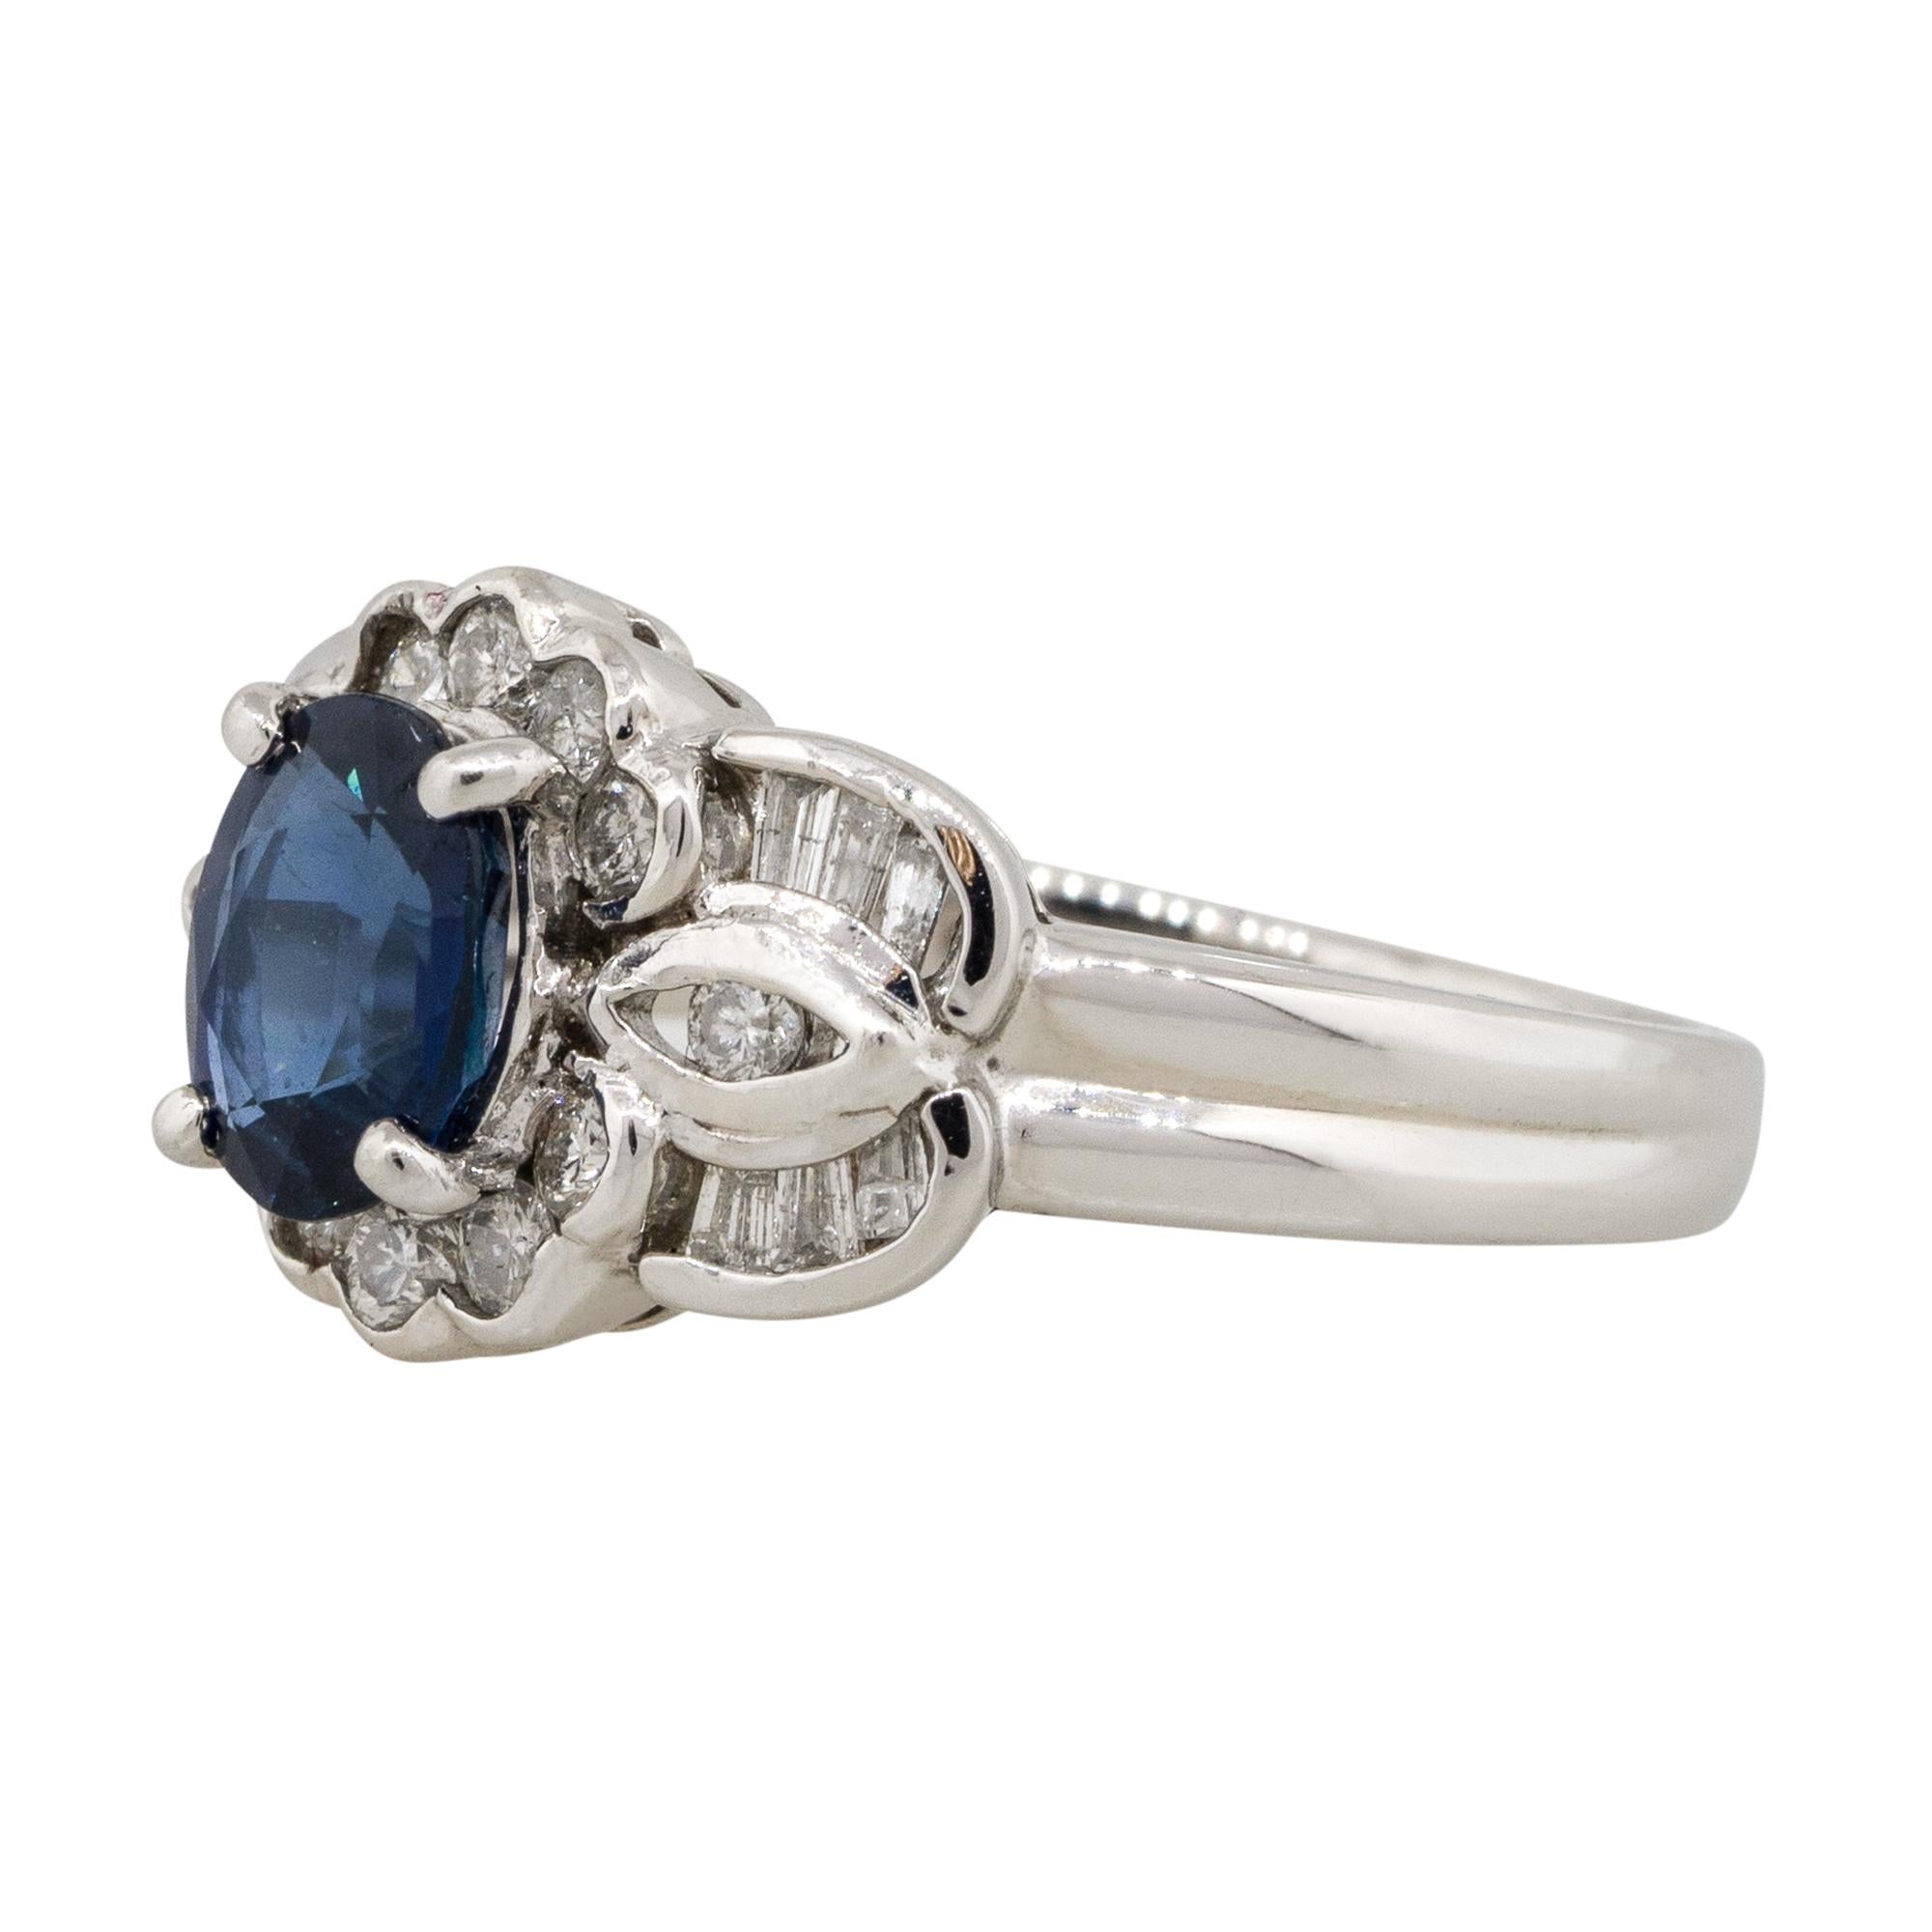 Material: Platinum
Gemstone details: Approx. 1.25ctw oval cut Sapphire center
Diamond details: Approx. 0.47ctw of round and baguette cut Diamonds. Diamonds are G/H in color and VS in clarity
Ring Size: 6.5 
Ring Measurements: 0.75